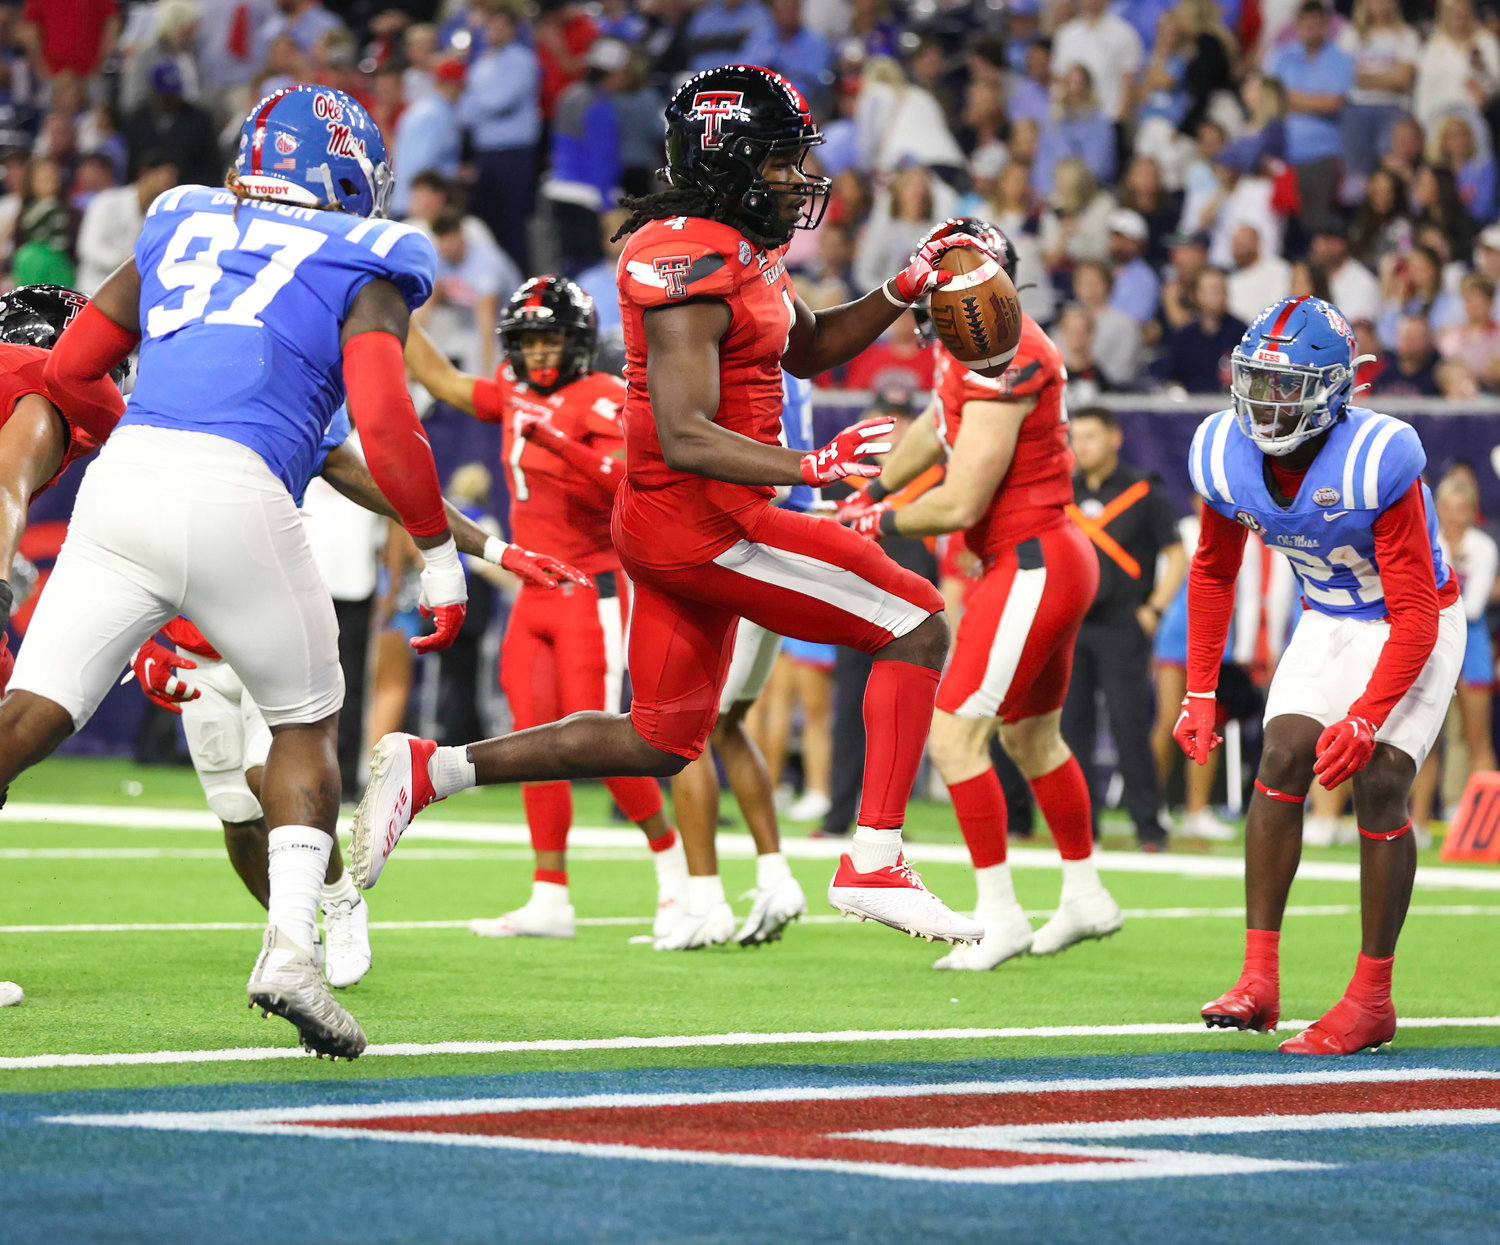 Texas Tech wide receiver Myles Price (1) leaps into the end zone to score a touchdown during the TaxAct Texas Bowl on Dec. 28, 2022 in Houston.